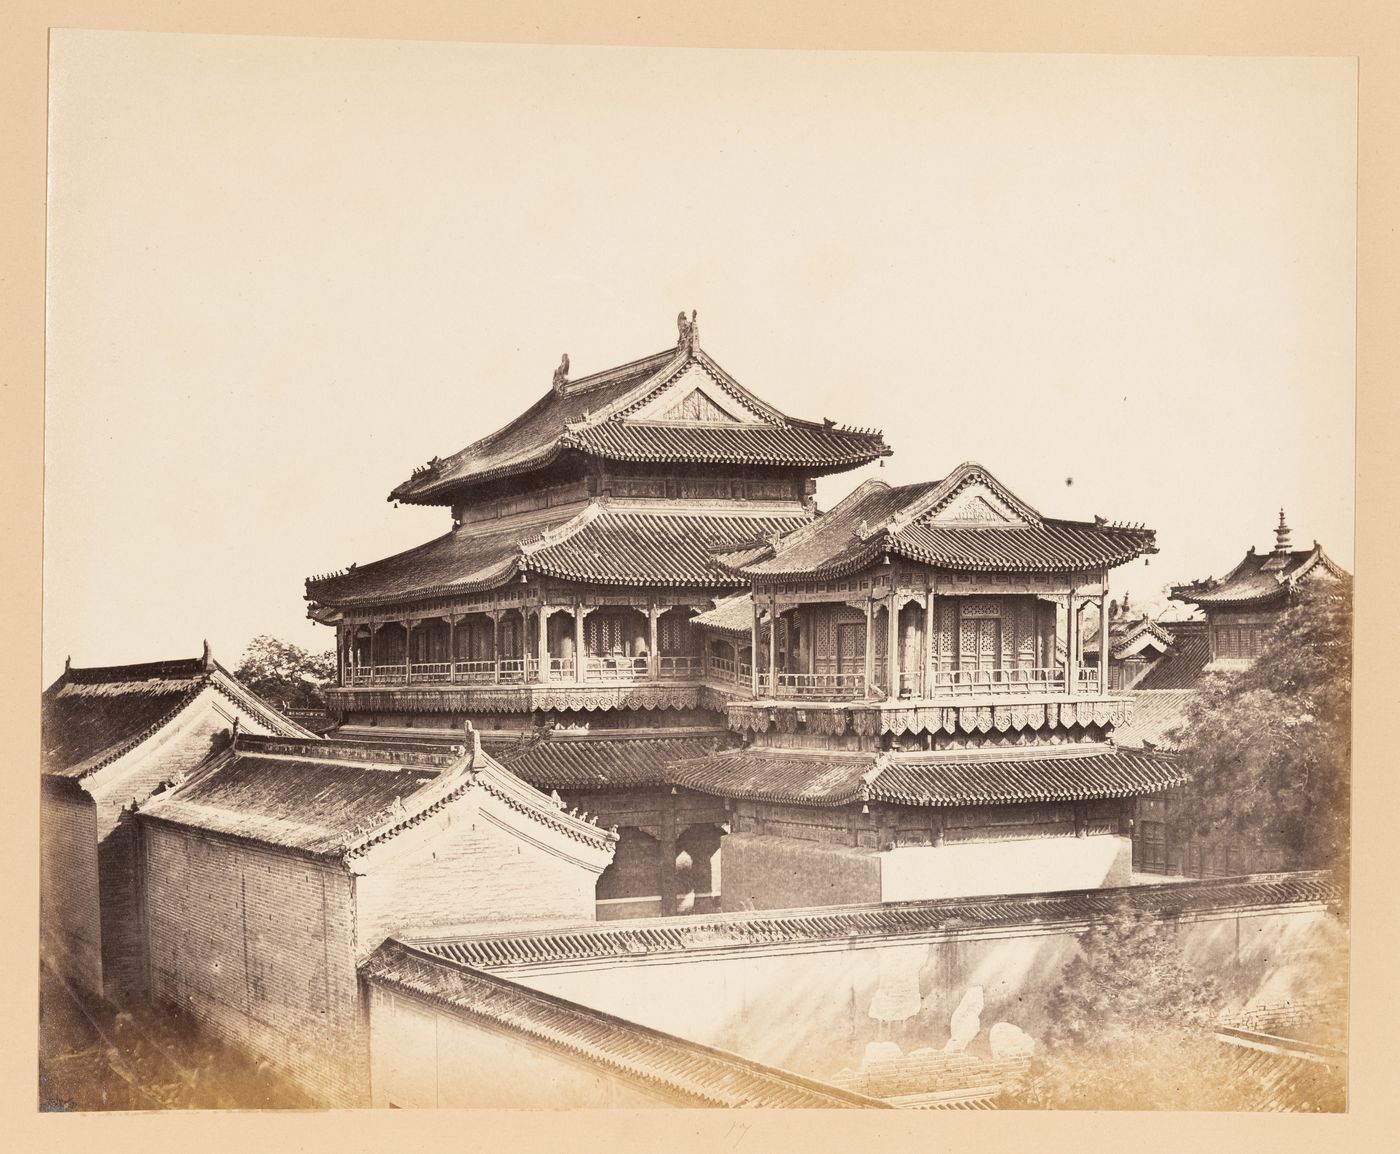 View of the Wanfu Ge [Ten Thousand Blessings Hall] and other buildings at the Yonghe Gong [Lamasery of Harmony and Peace] (also known as the Lama Temple), Peking (now Beijing), China